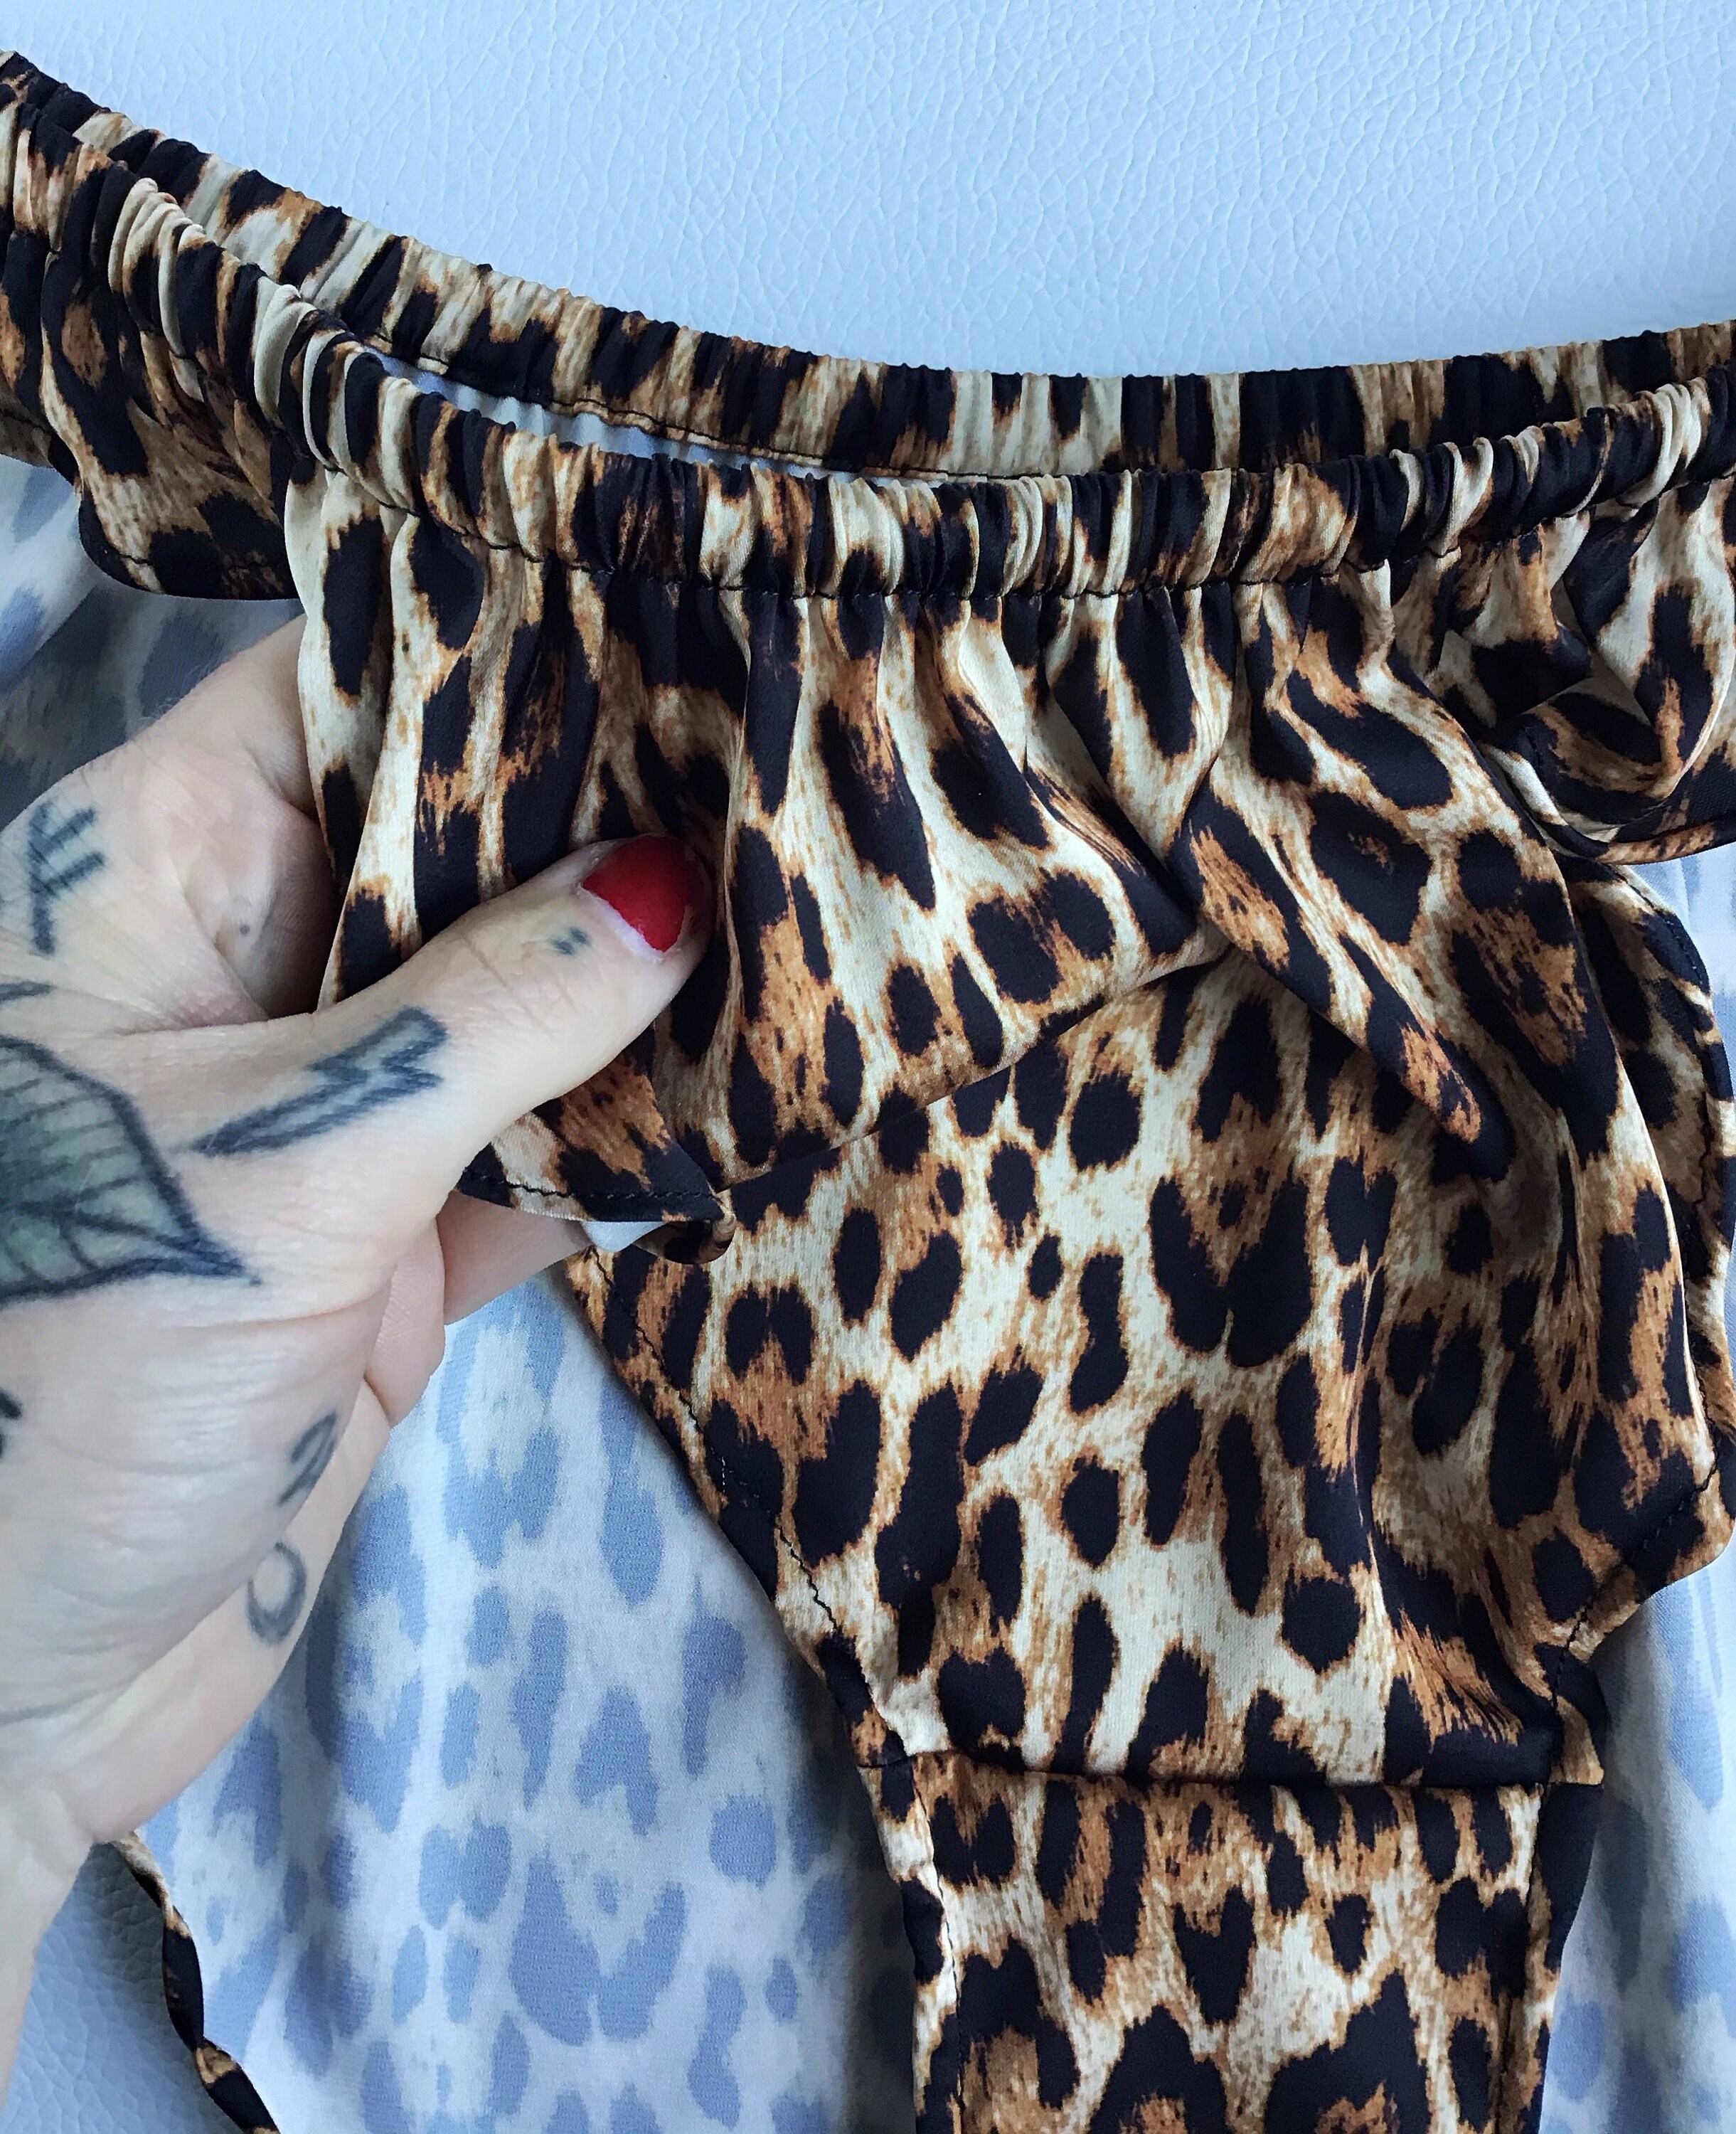 Leopard satin PASSION knickers. High waist retro style flutter panties. Handmade to order in your size lingerie. photo